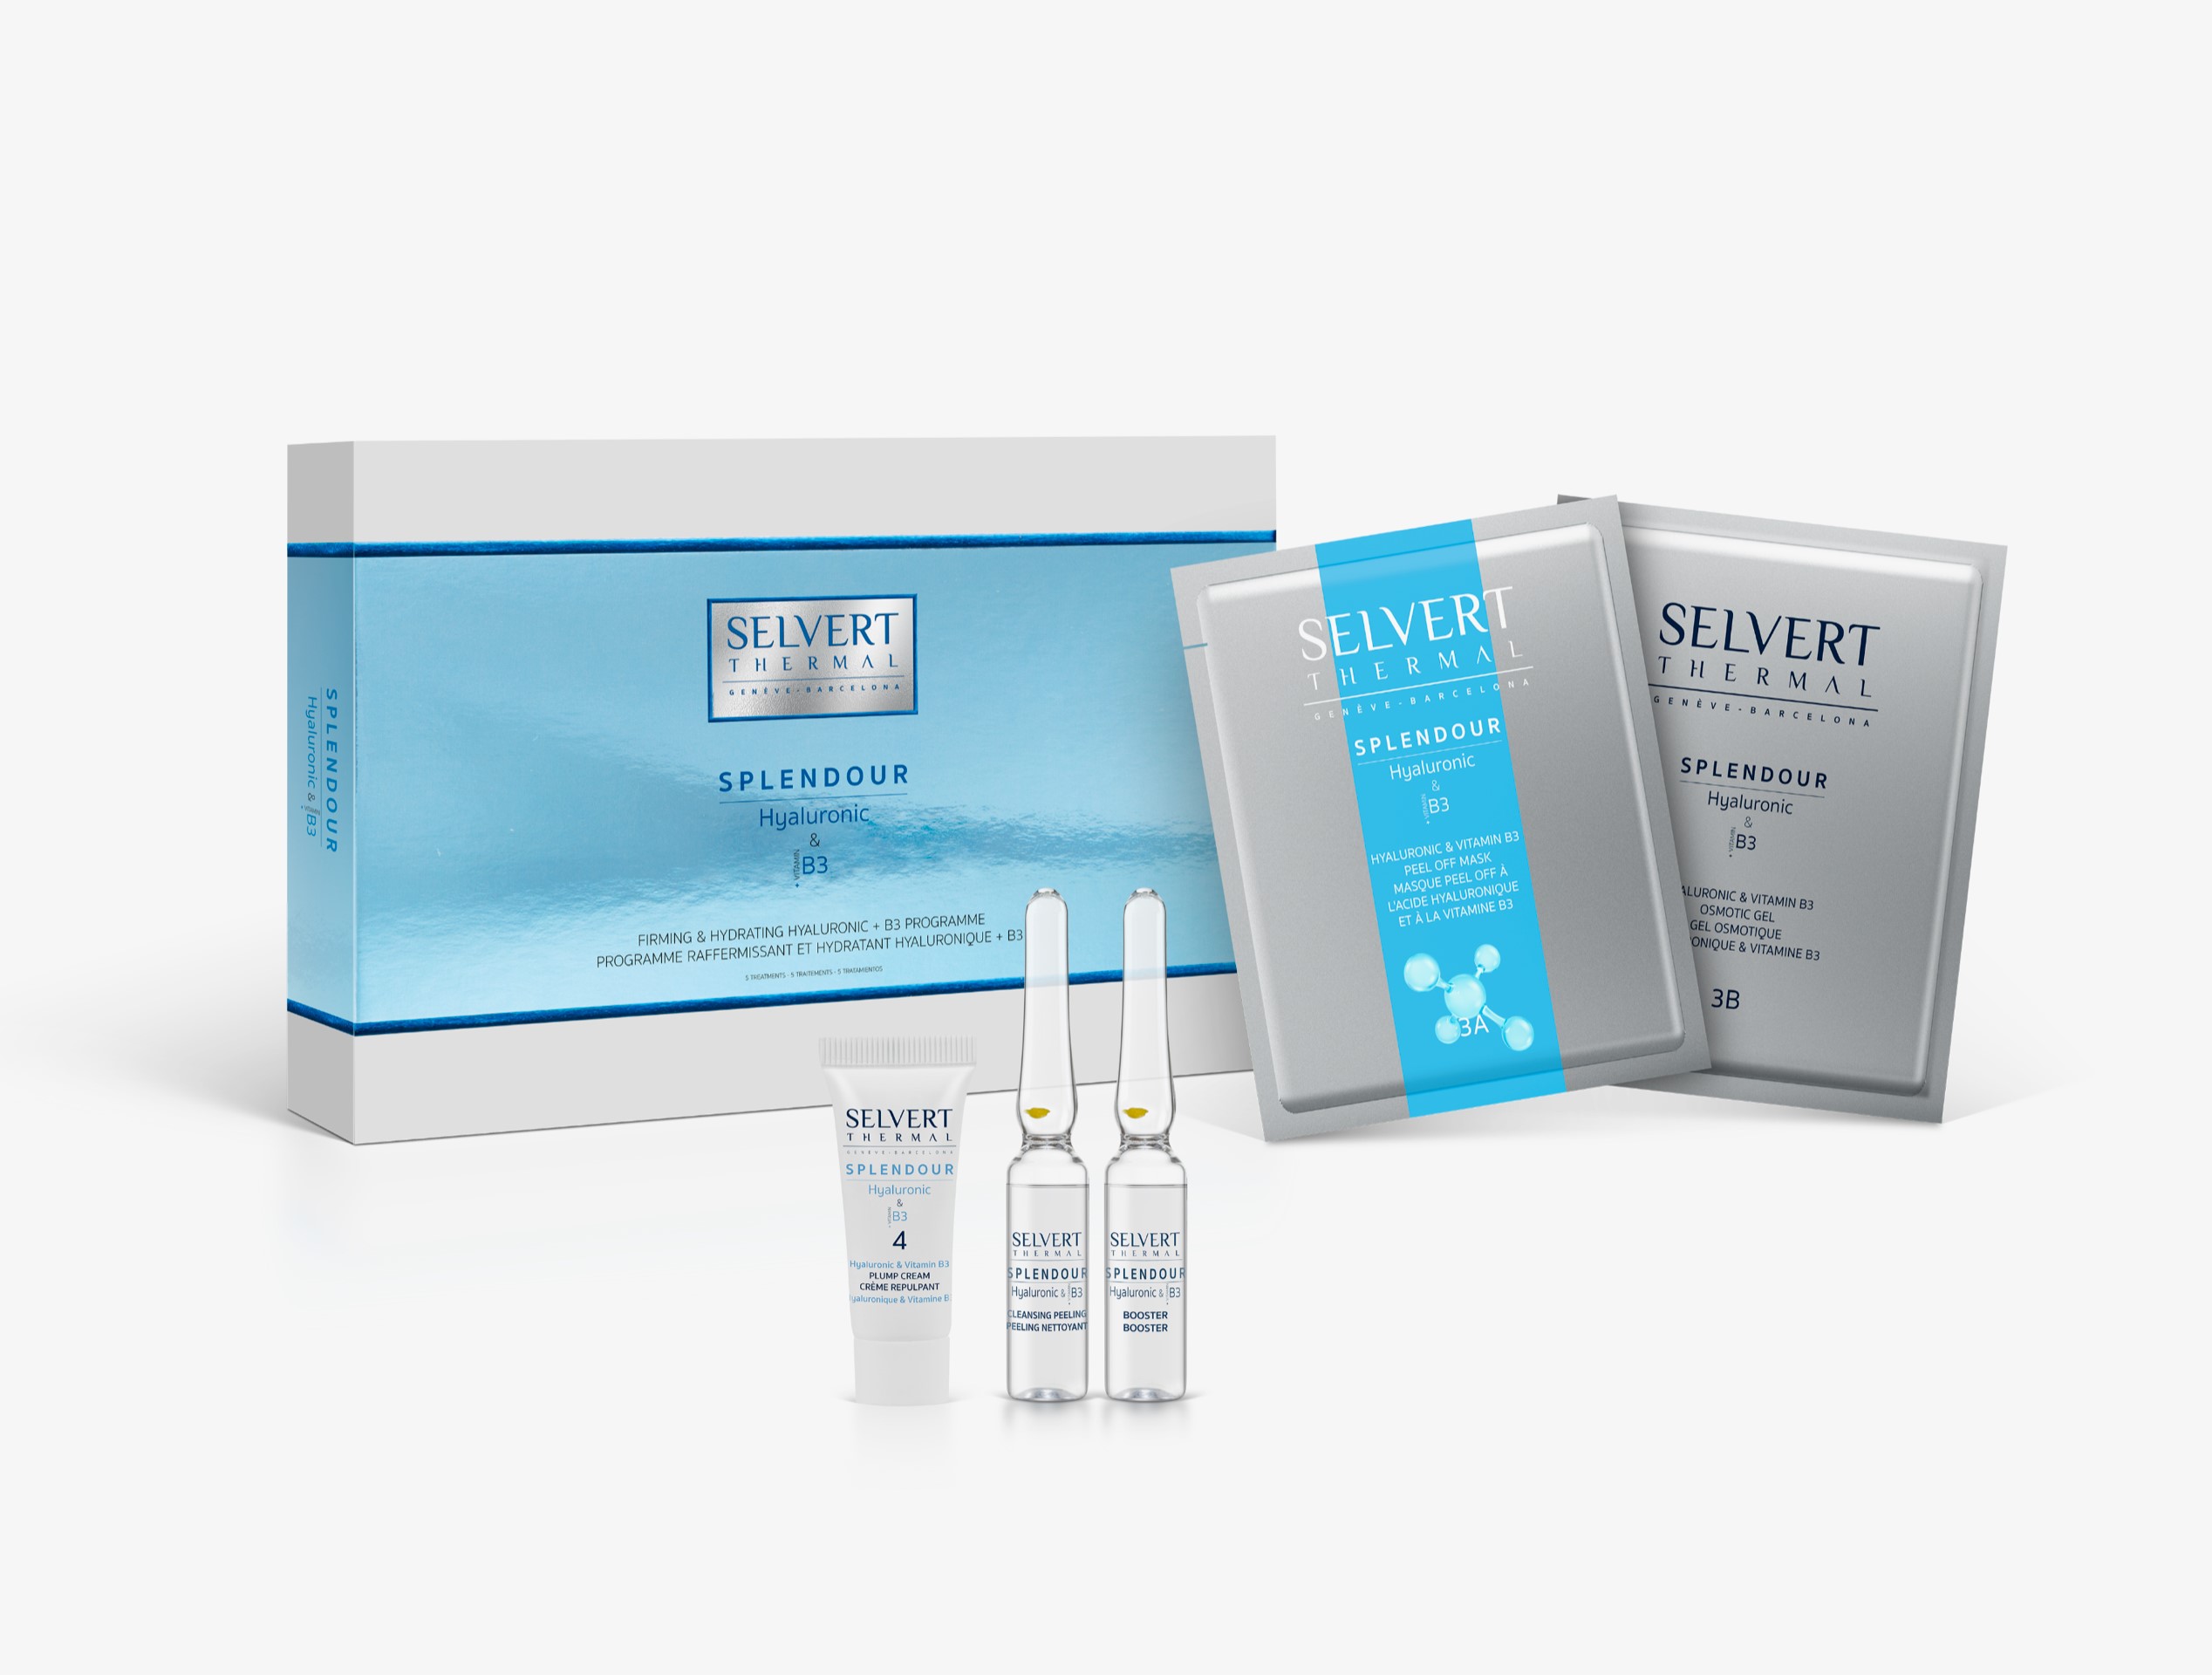 Firming & Hydrating Hyaluronic + B3 Programme Firming & Hydrating Hyaluronic + B3 Programme